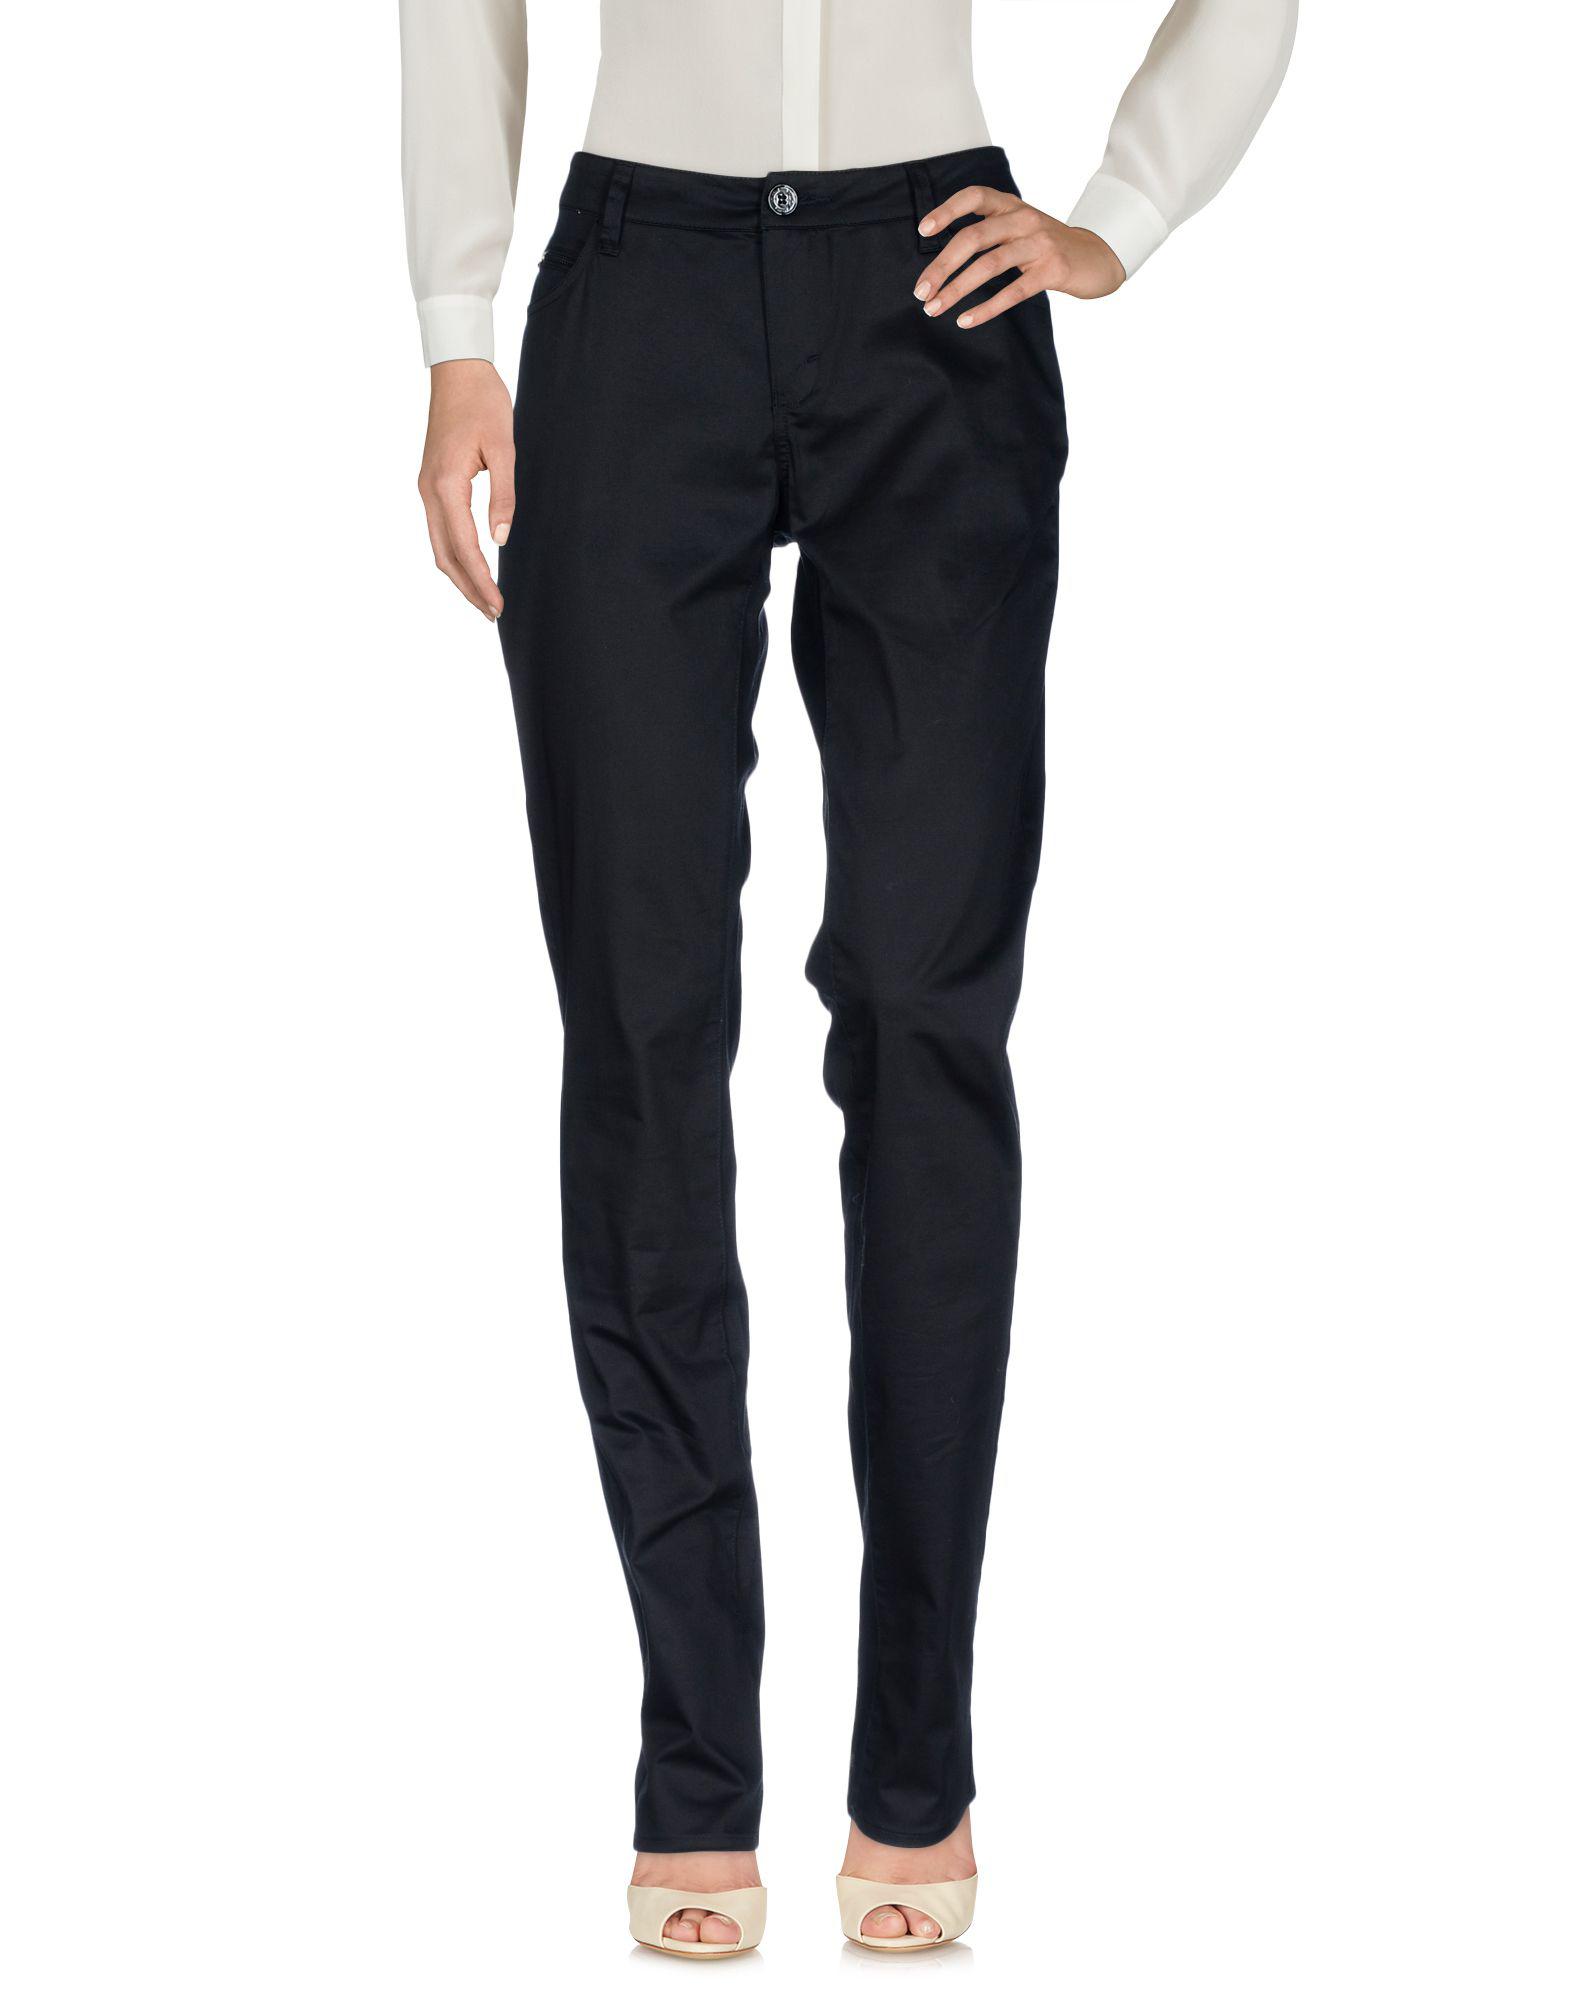 Armani Jeans Cotton Casual Pants in Black - Lyst